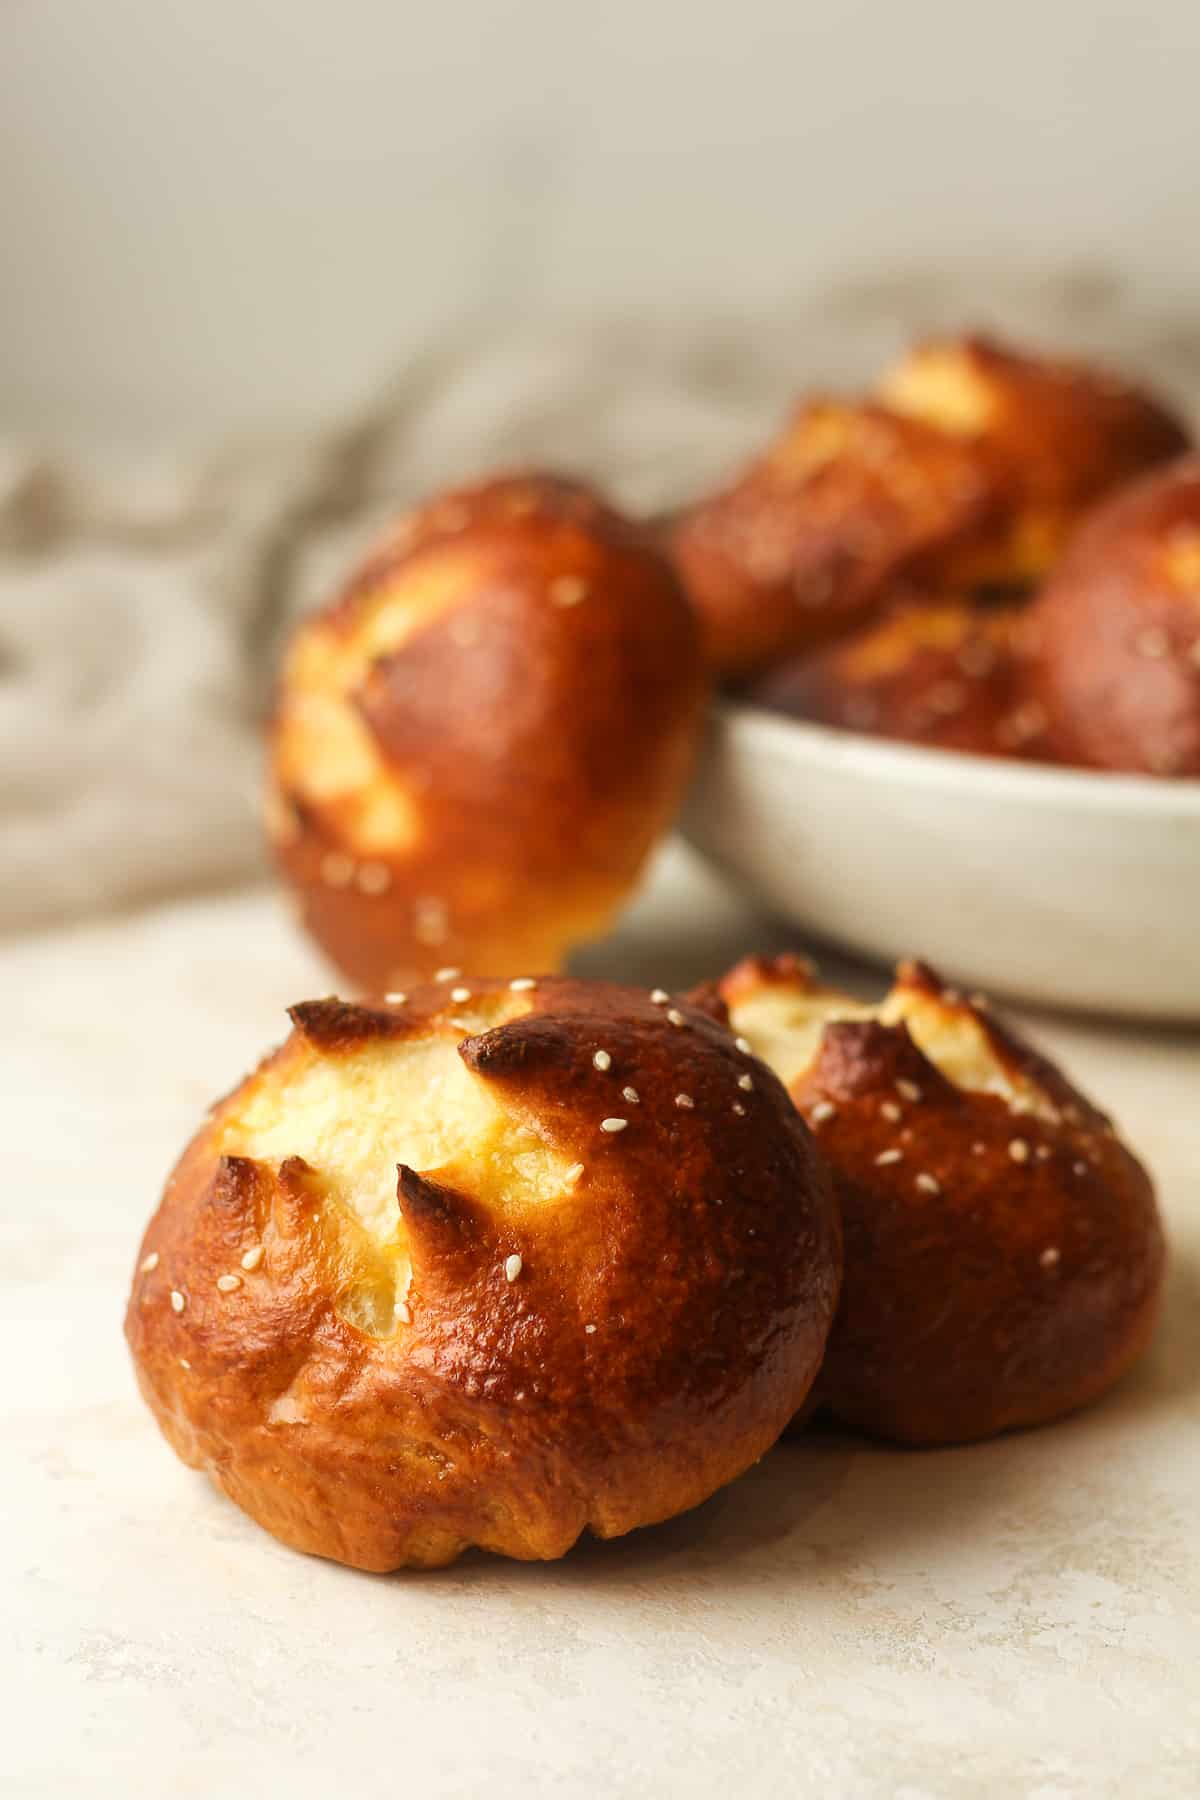 Side view of two pretzel buns with more in the background.